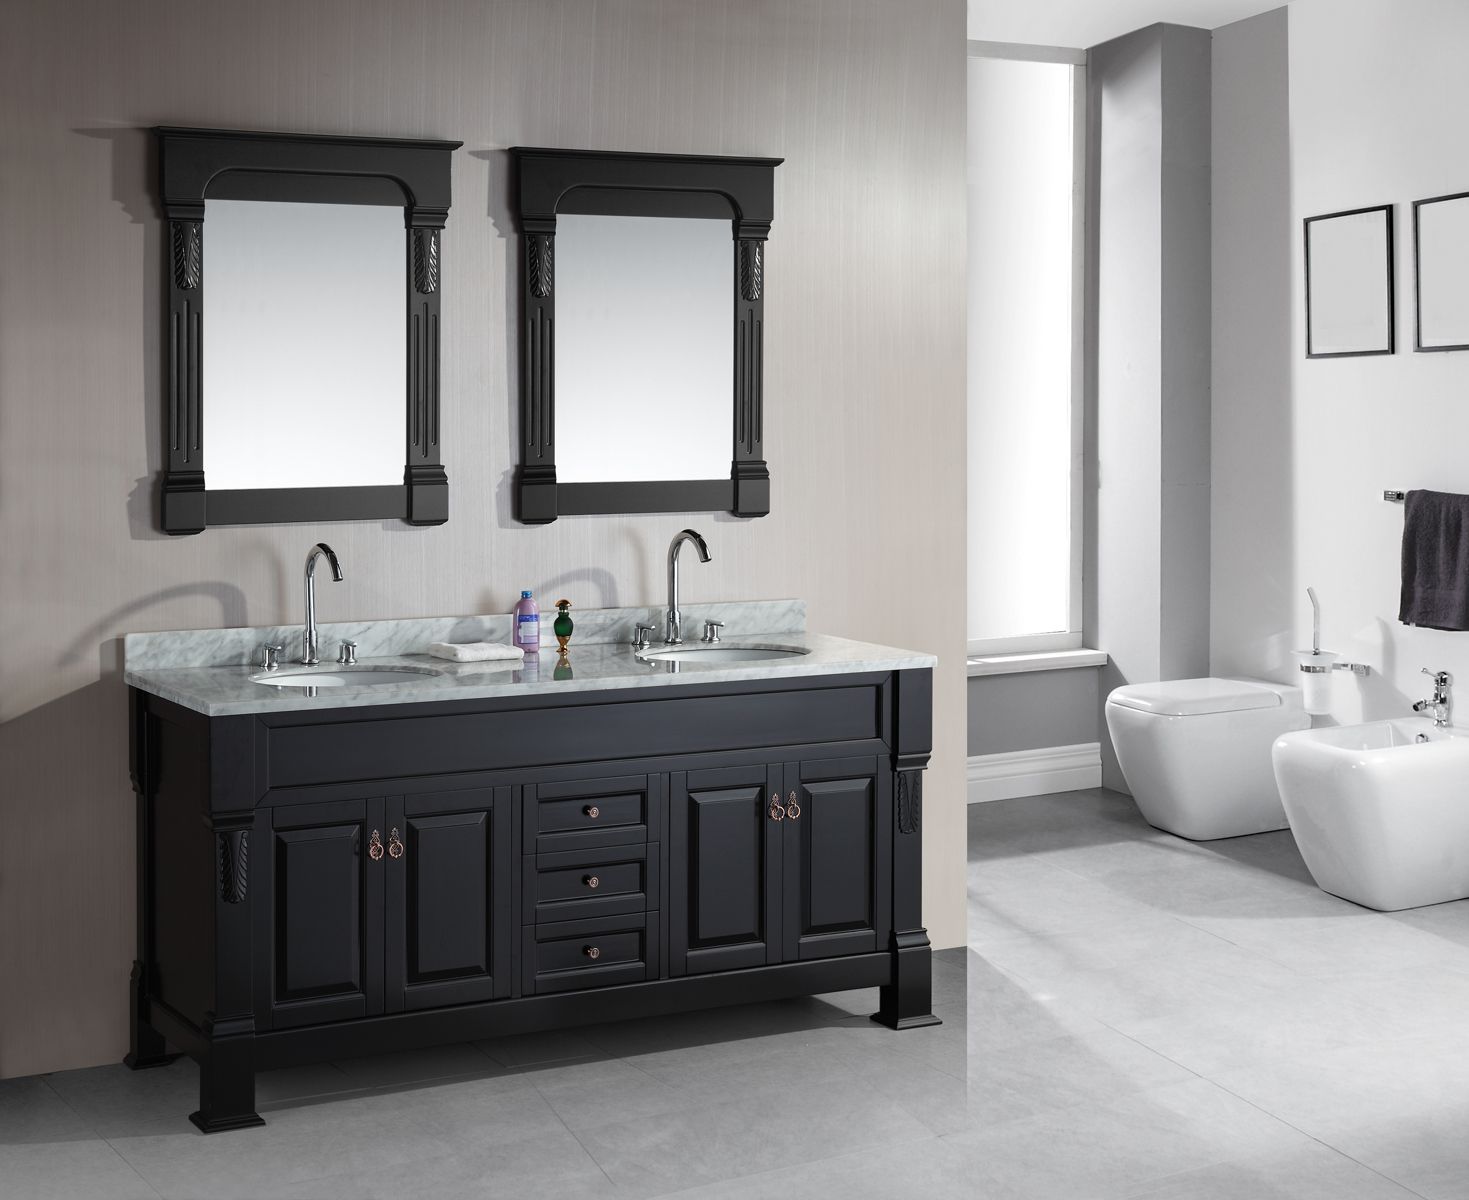 Double Sink Silver Shipshape Double Sink Vanity Feat Silver Faucets Vicinity White Toilets At Modern Bathroom Bathroom Double Sink Vanity Application For Spacious Bathroom Design